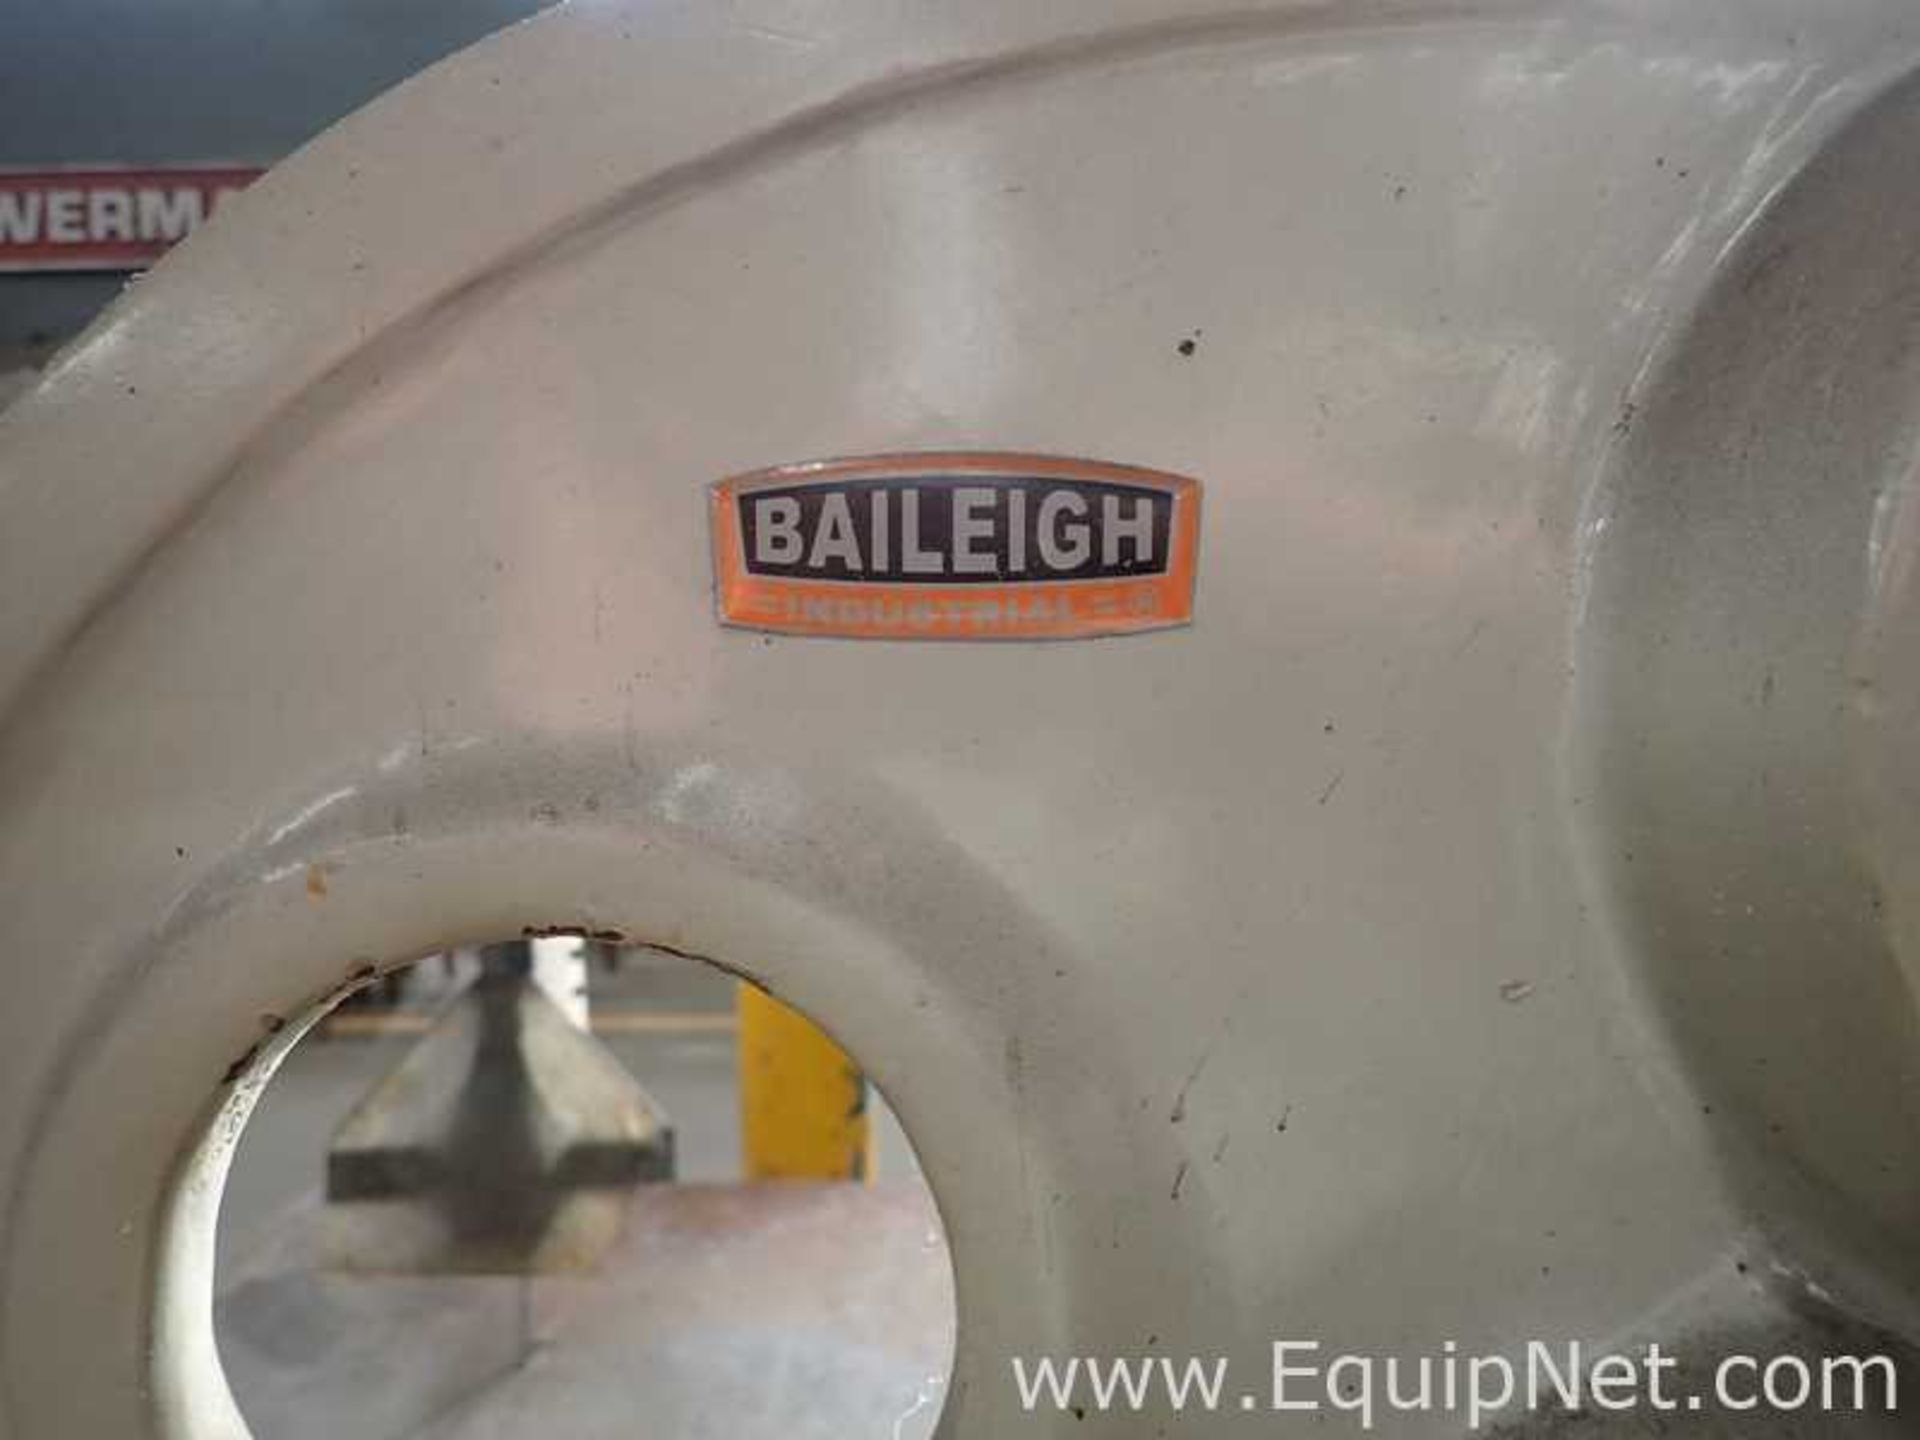 Baileigh Industrial Arbor Press - Image 5 of 5